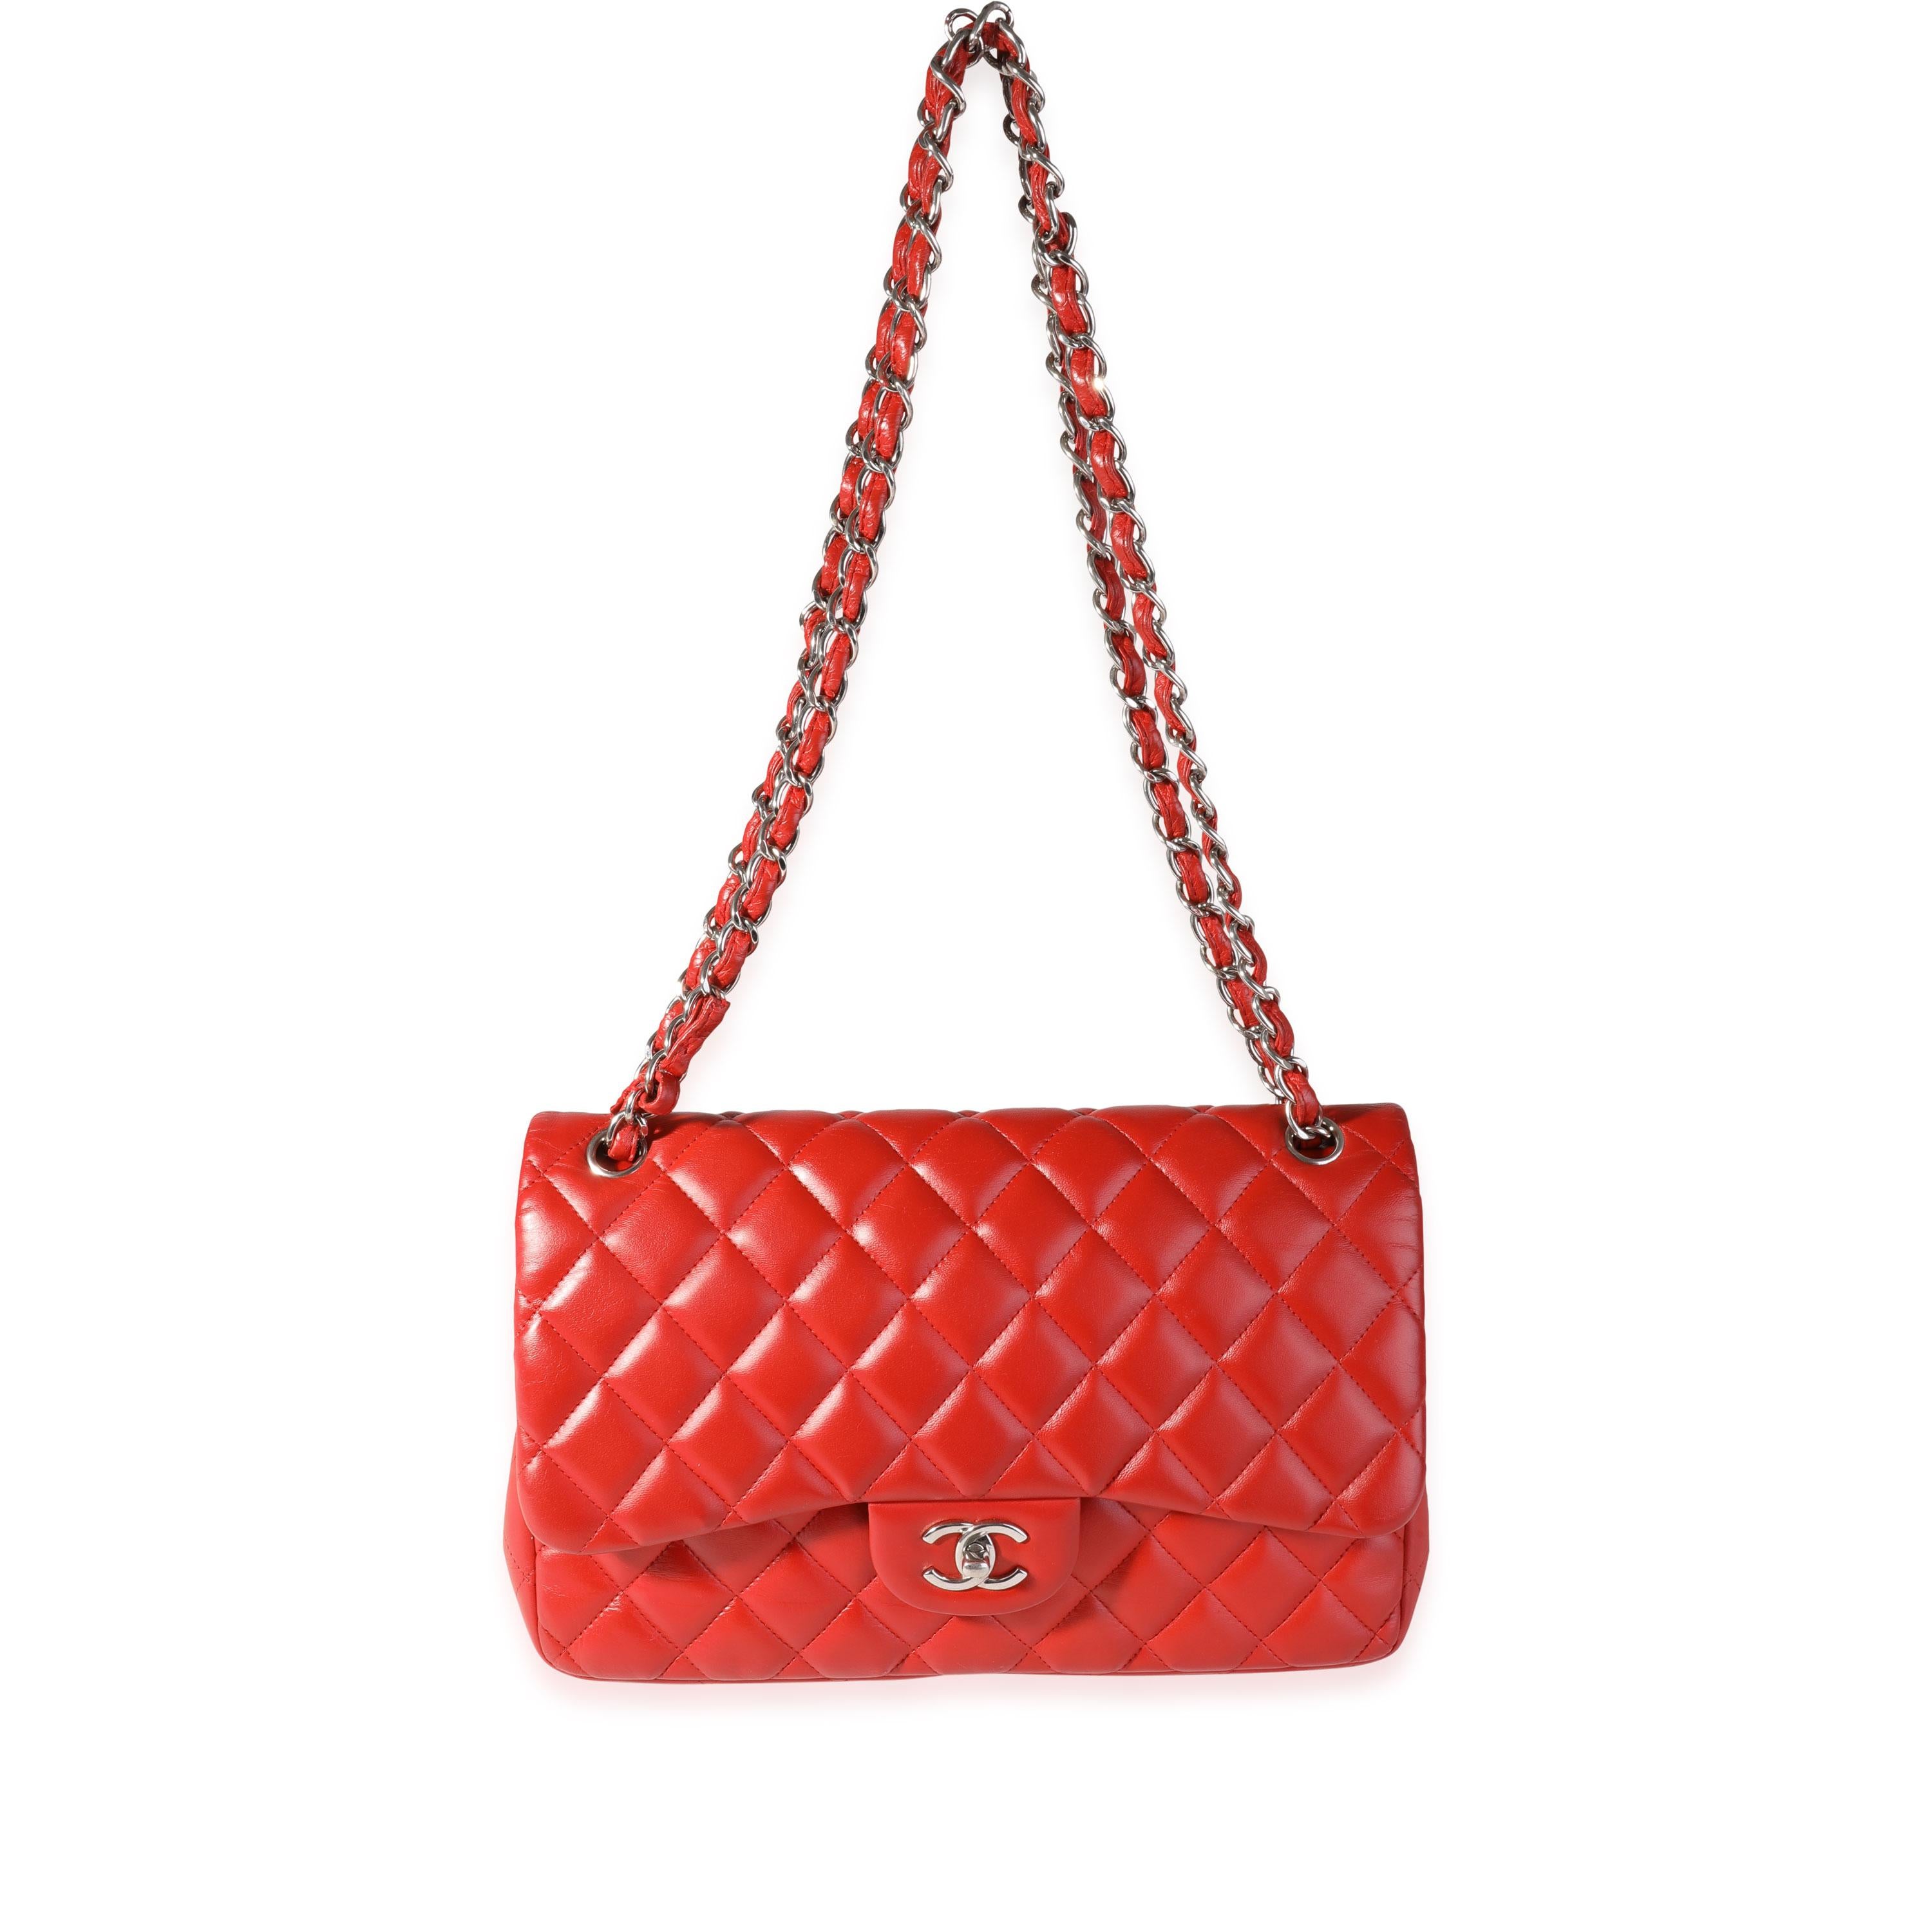 Listing Title: Chanel Red Quilted Lambskin Classic Jumbo Double Flap Bag
SKU: 119371
MSRP: 9500.00

Handbag Condition: Good
Condition Comments: Item has been repainted throughout exterior corners and interior lining. Moderate cracking at exterior